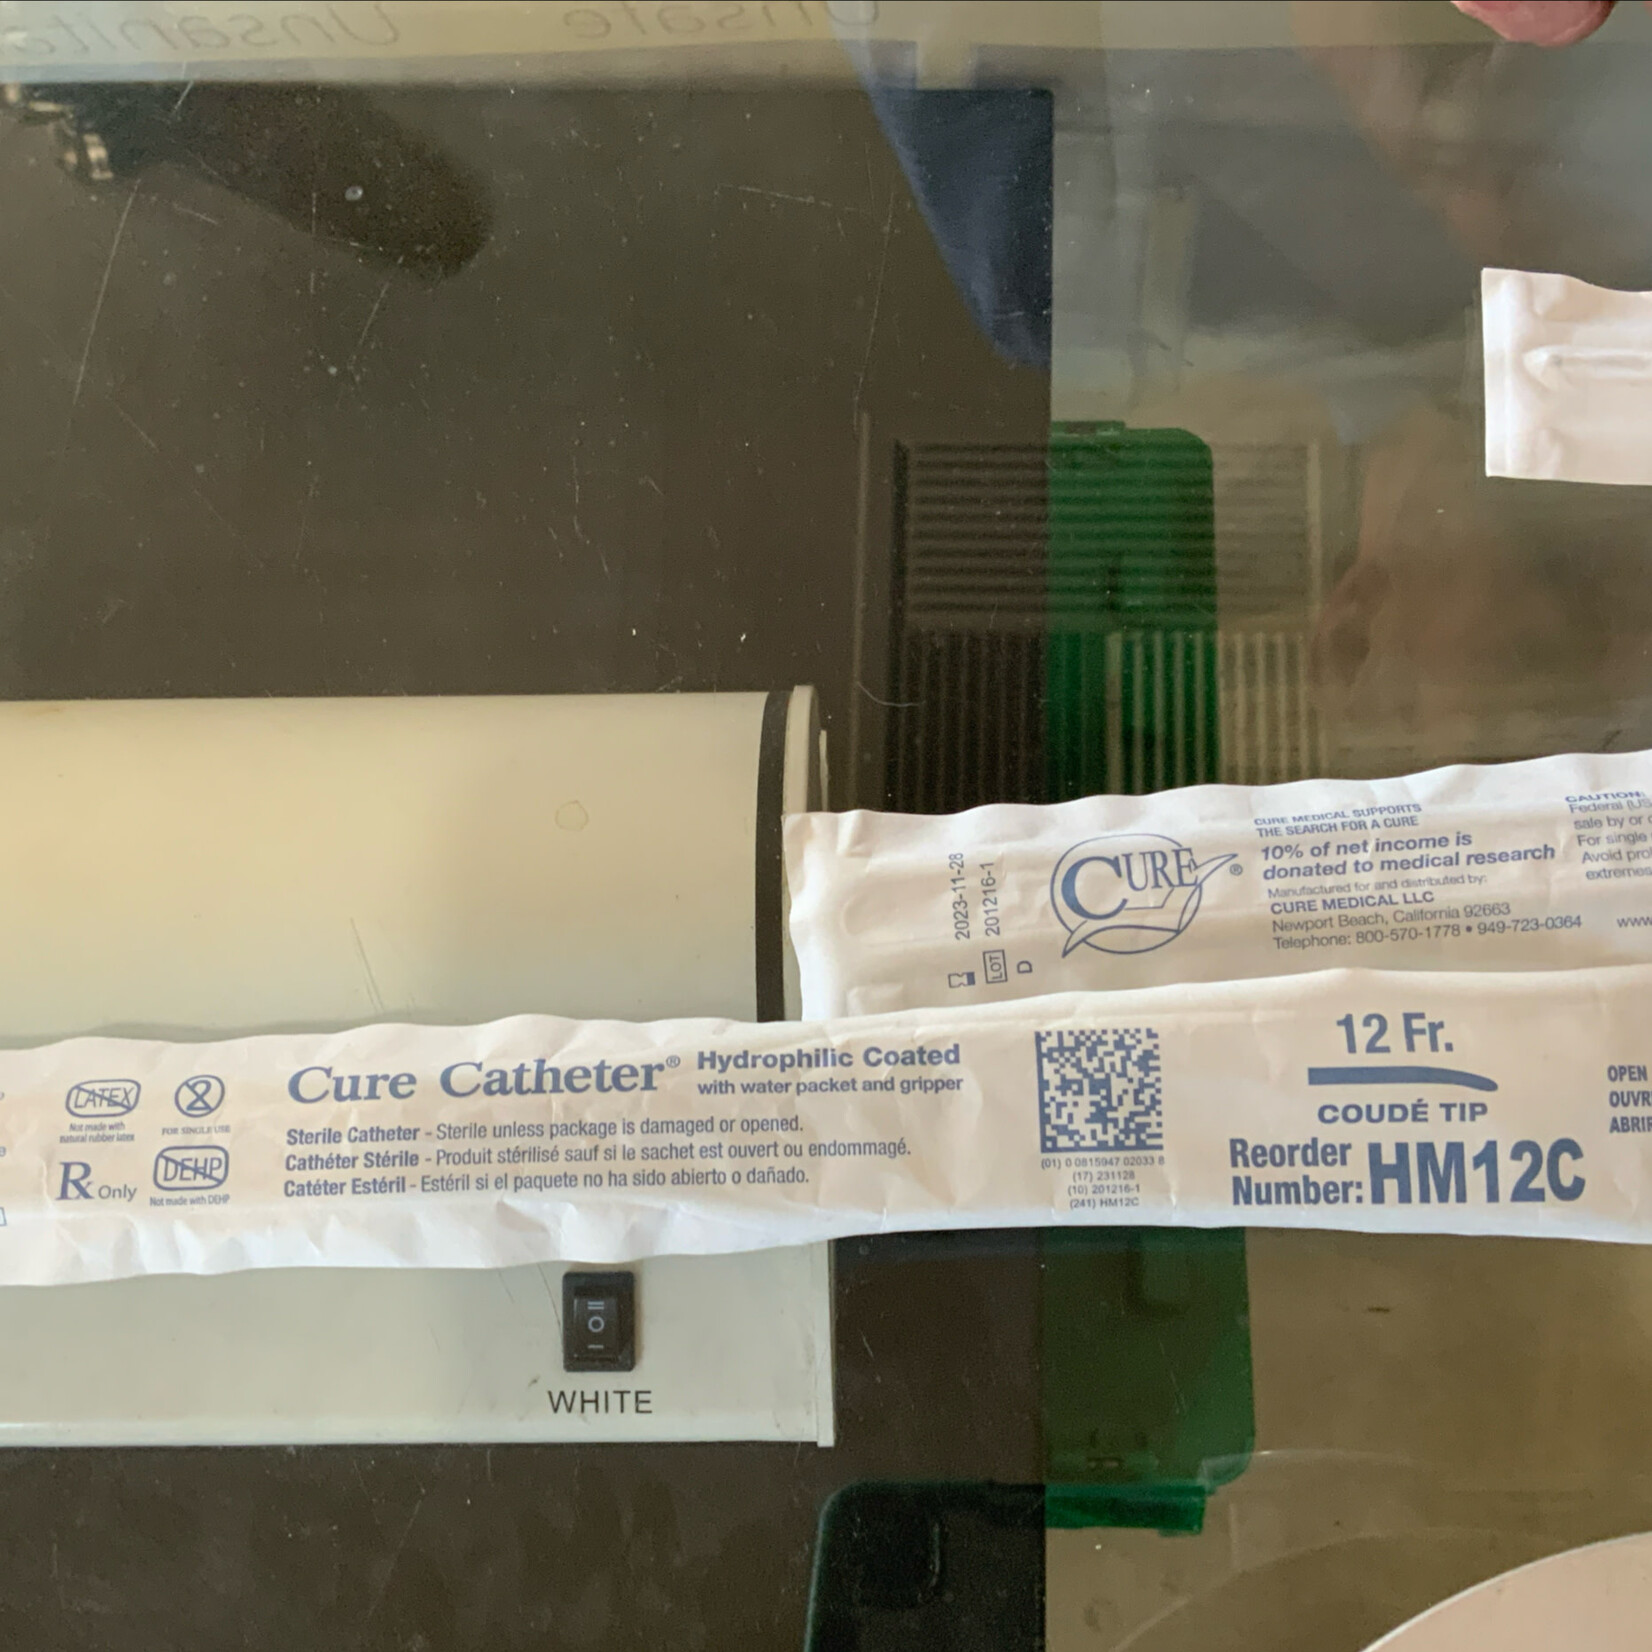 Cure Catheter Hydrophillic Coated 12 FR, Coude Tip